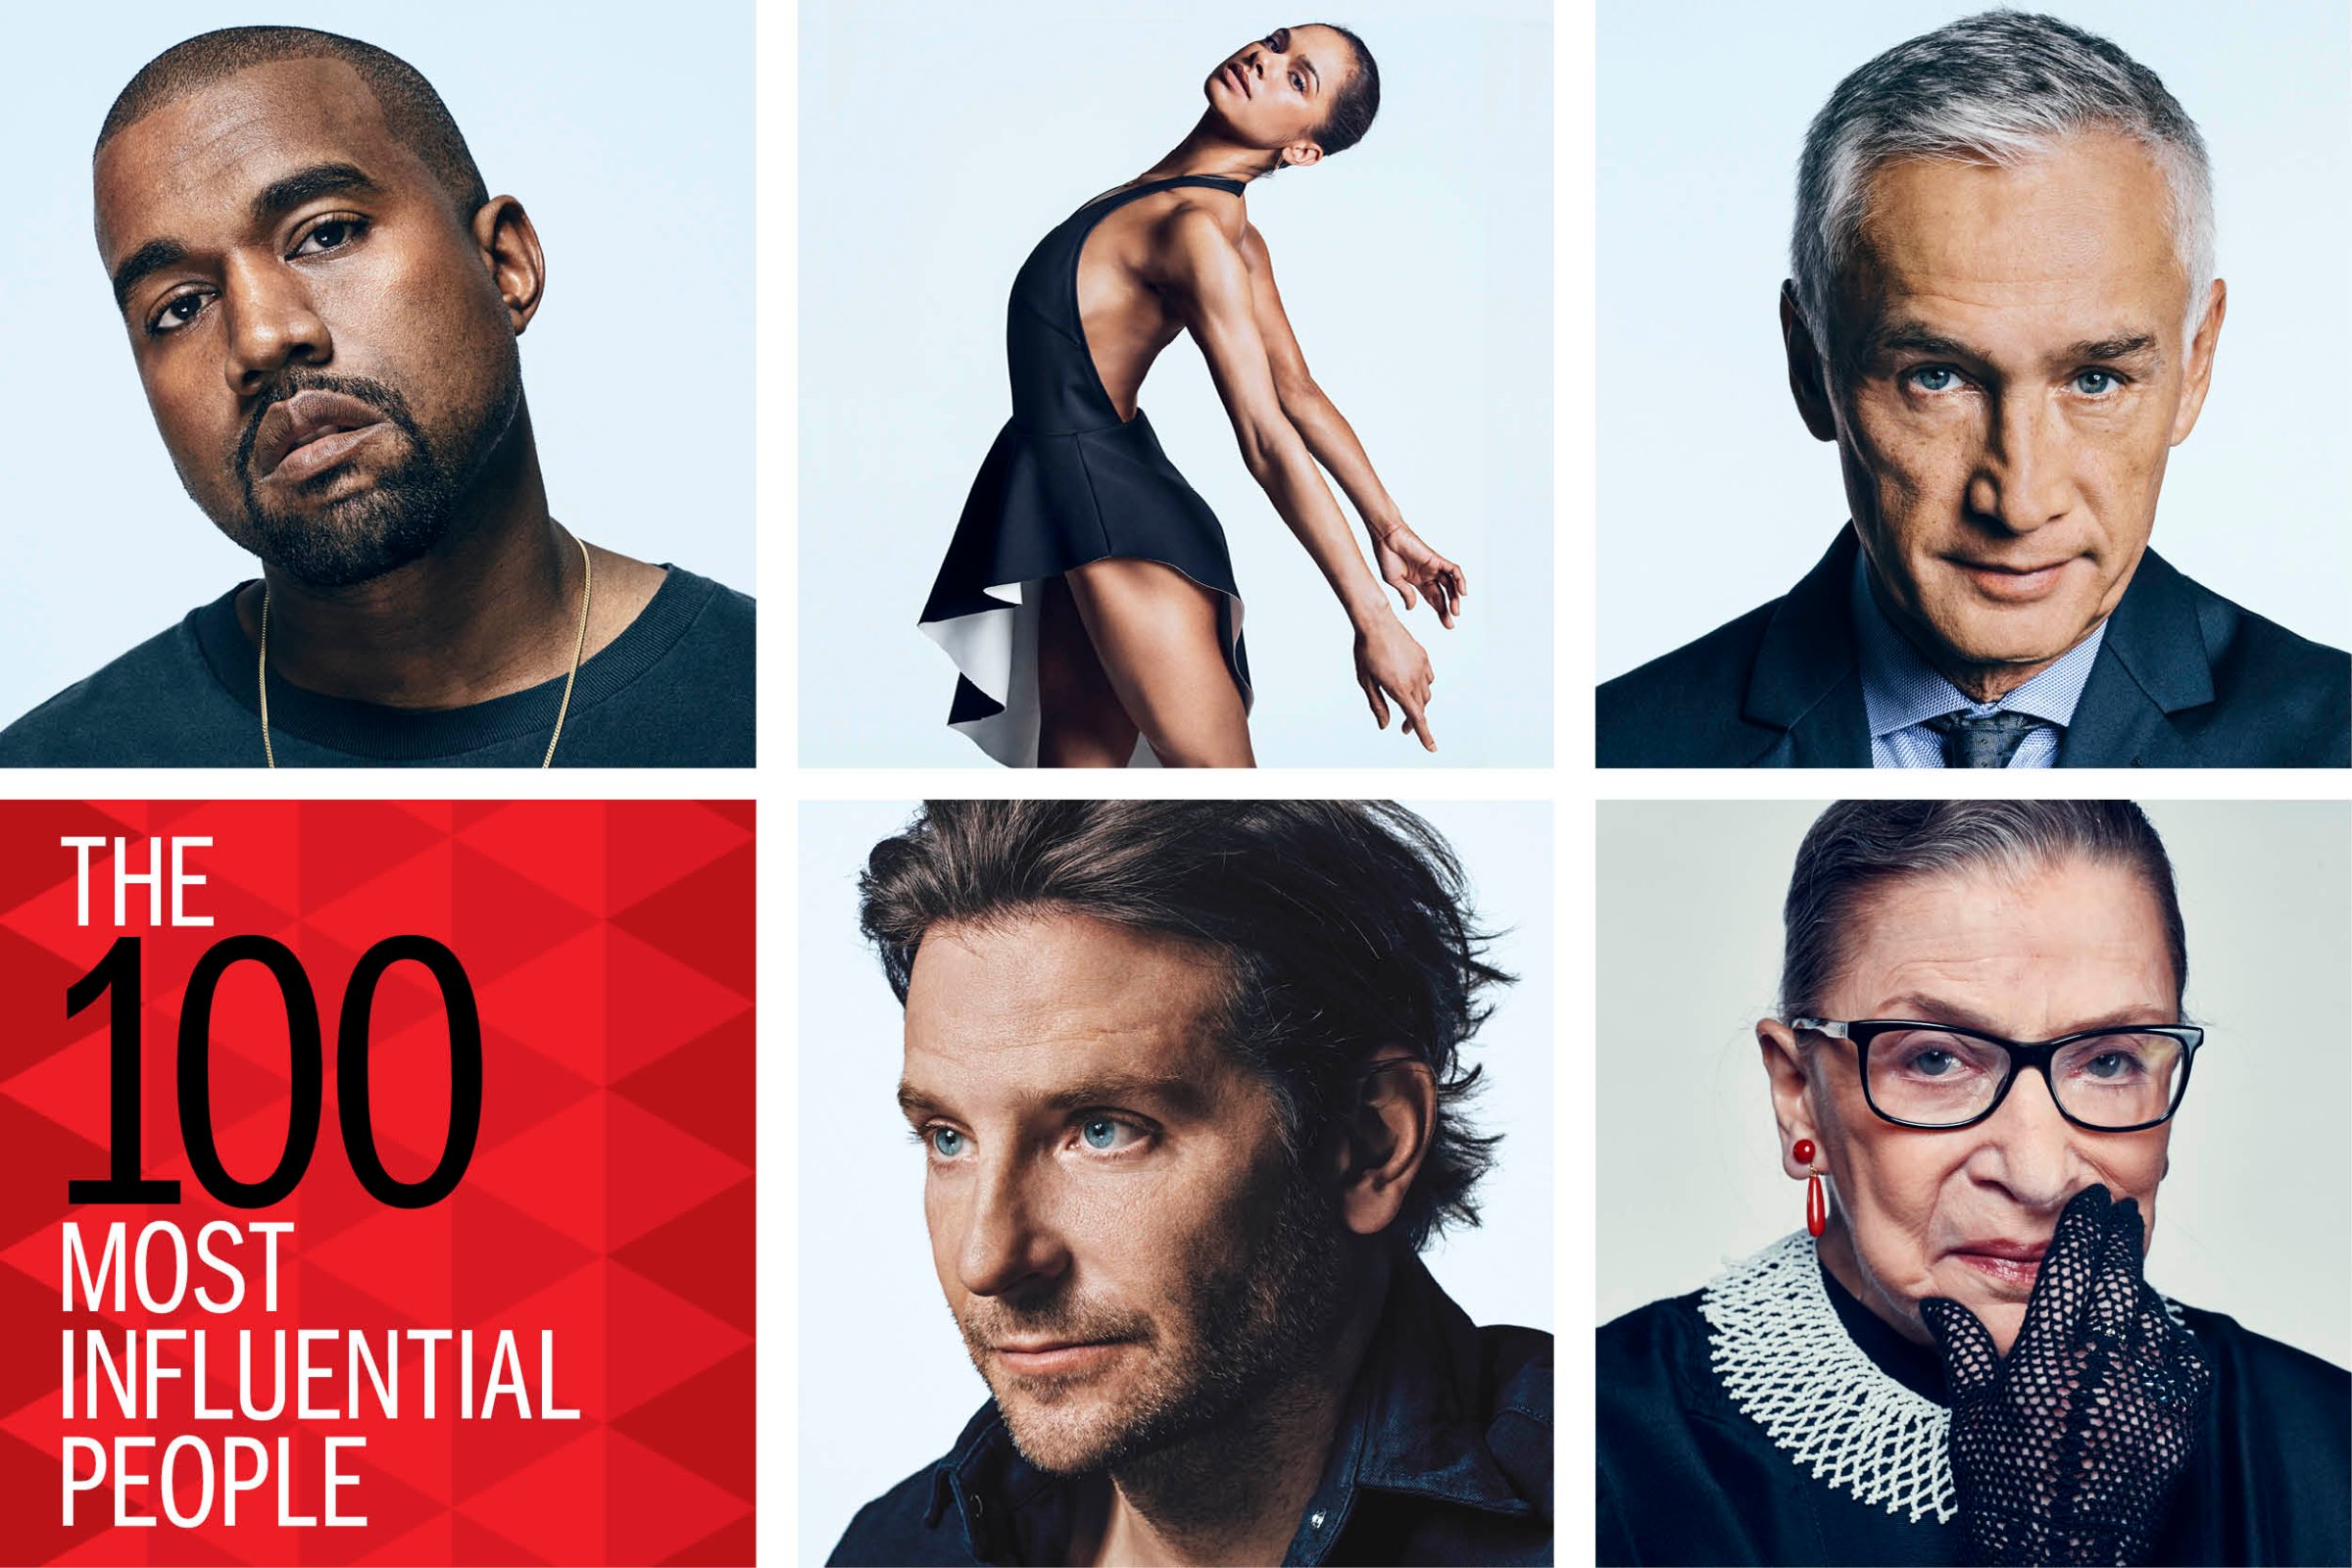 TIME 100 The Most Influential People photo grid